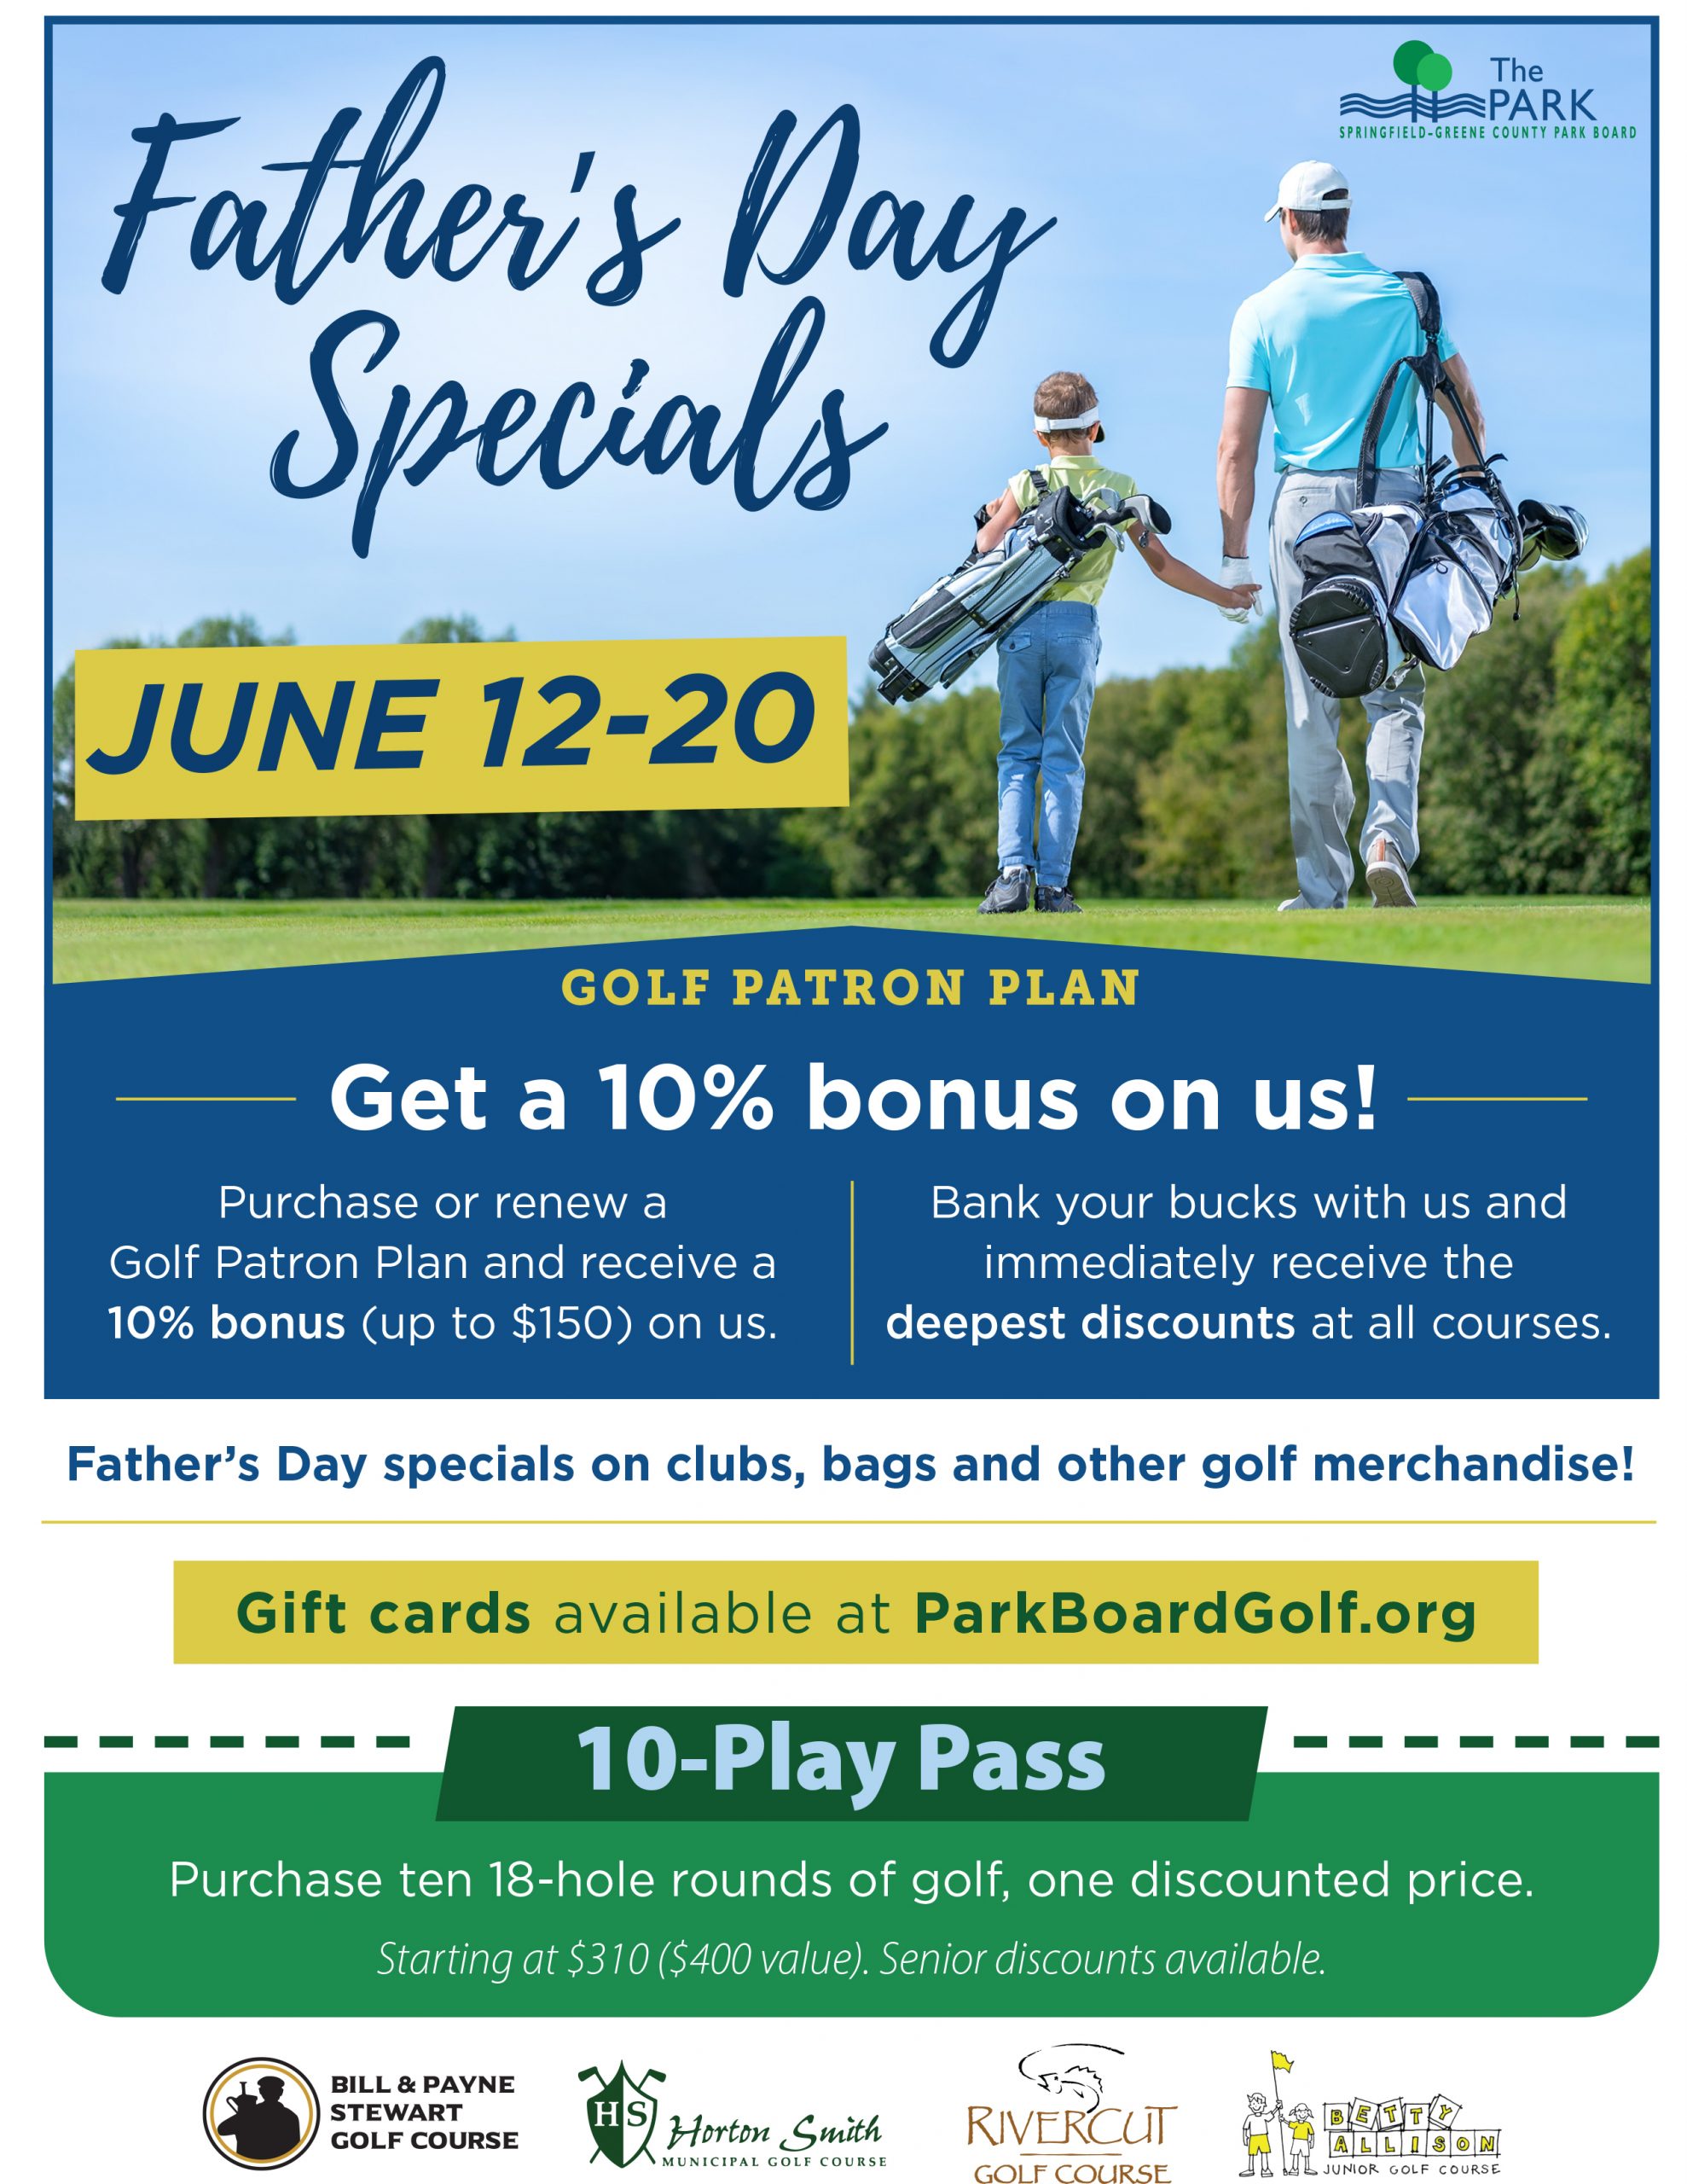 fathers day promo